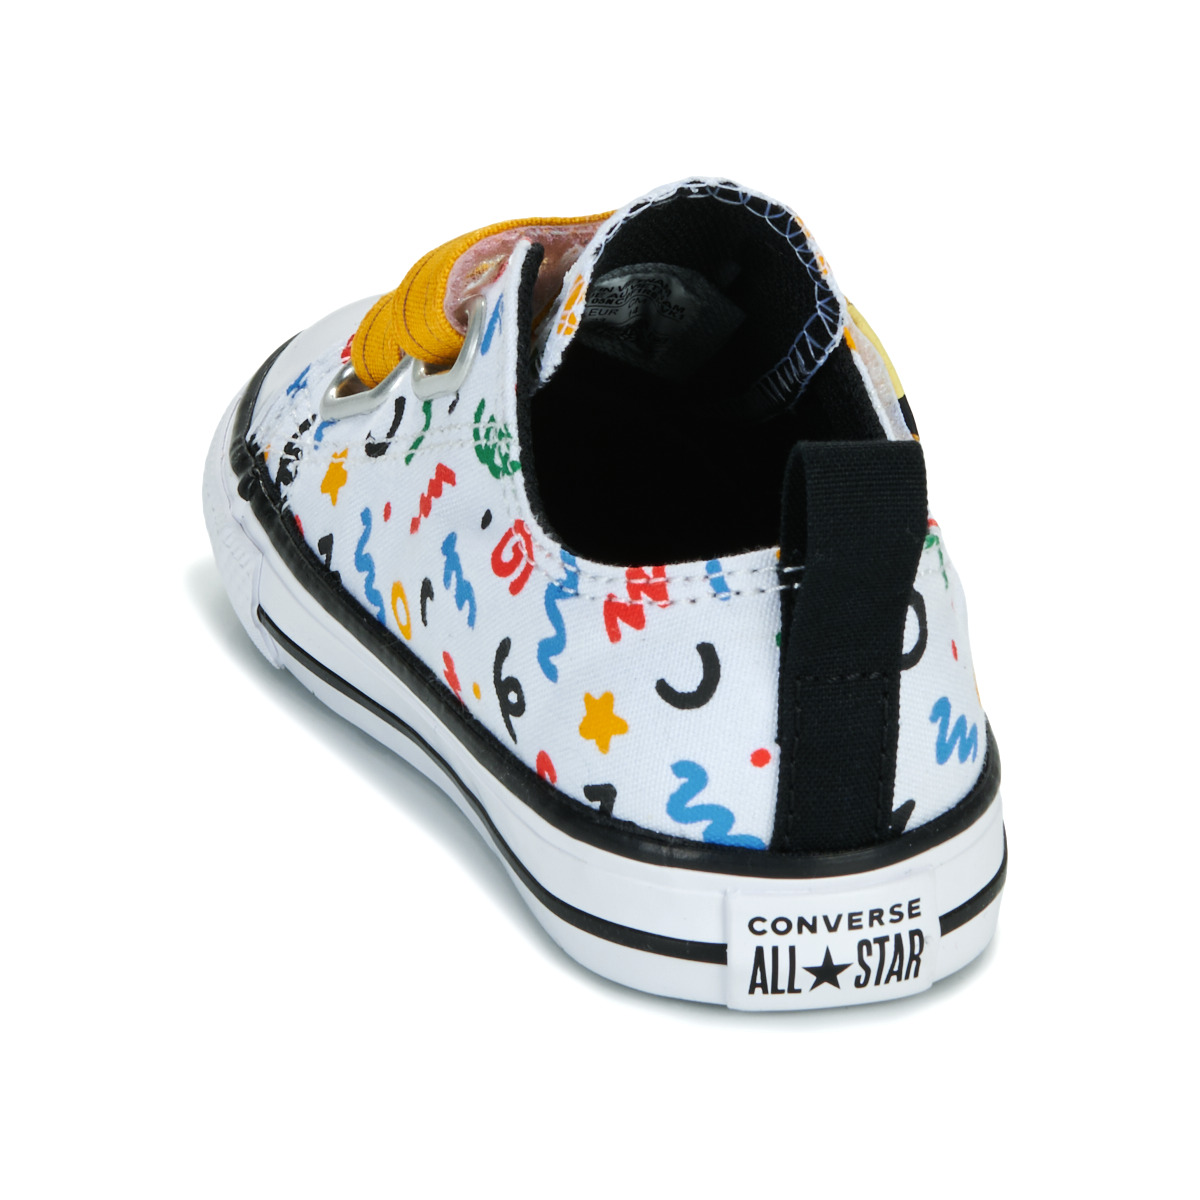 Converse Blanc / Multicolore CHUCK TAYLOR ALL STAR EASY-ON DOODLES 9UO7eMmL